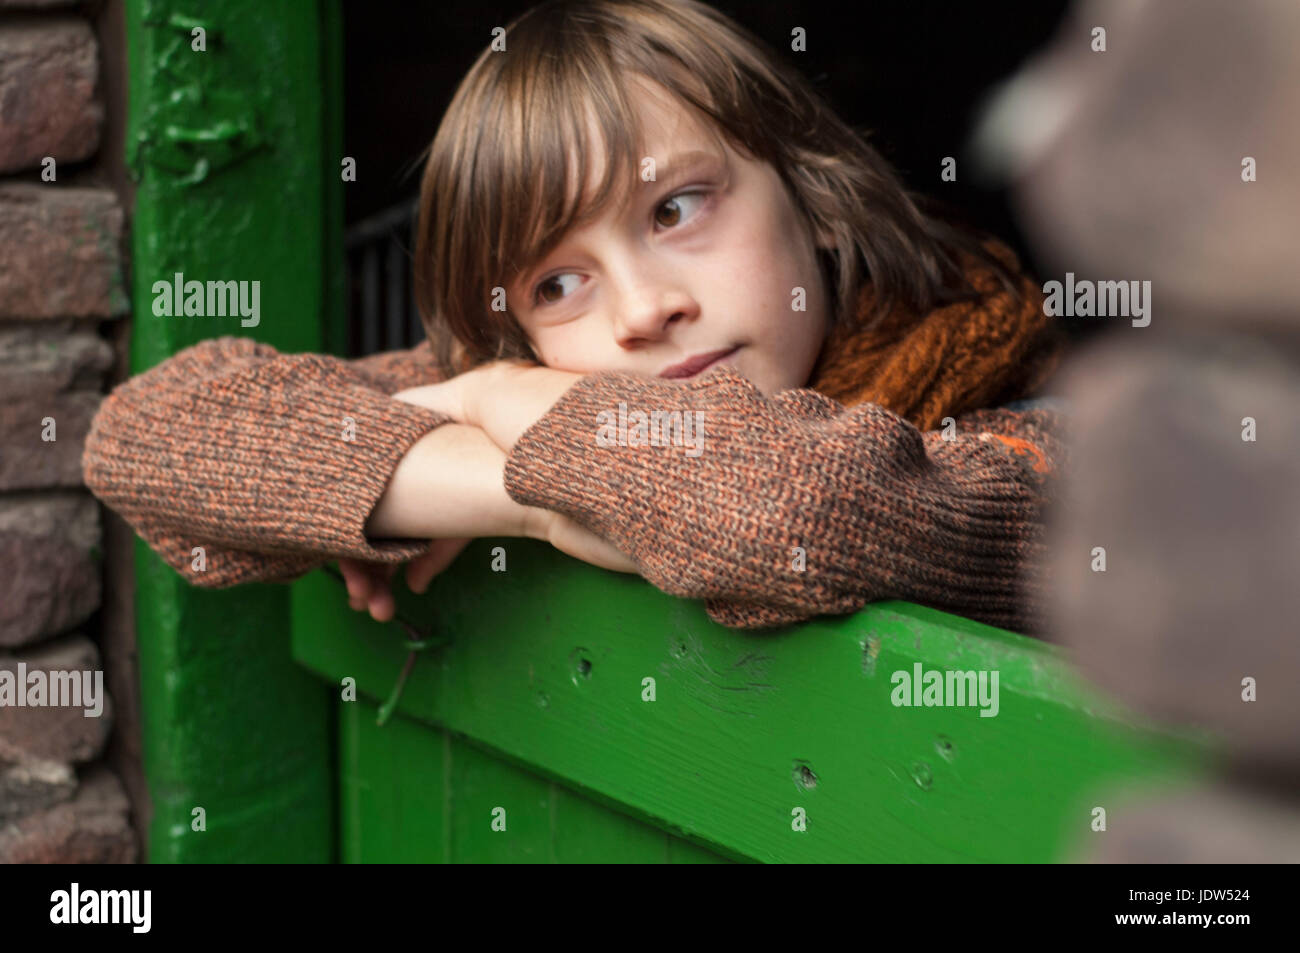 Boy leaning on green gate, looking away Stock Photo